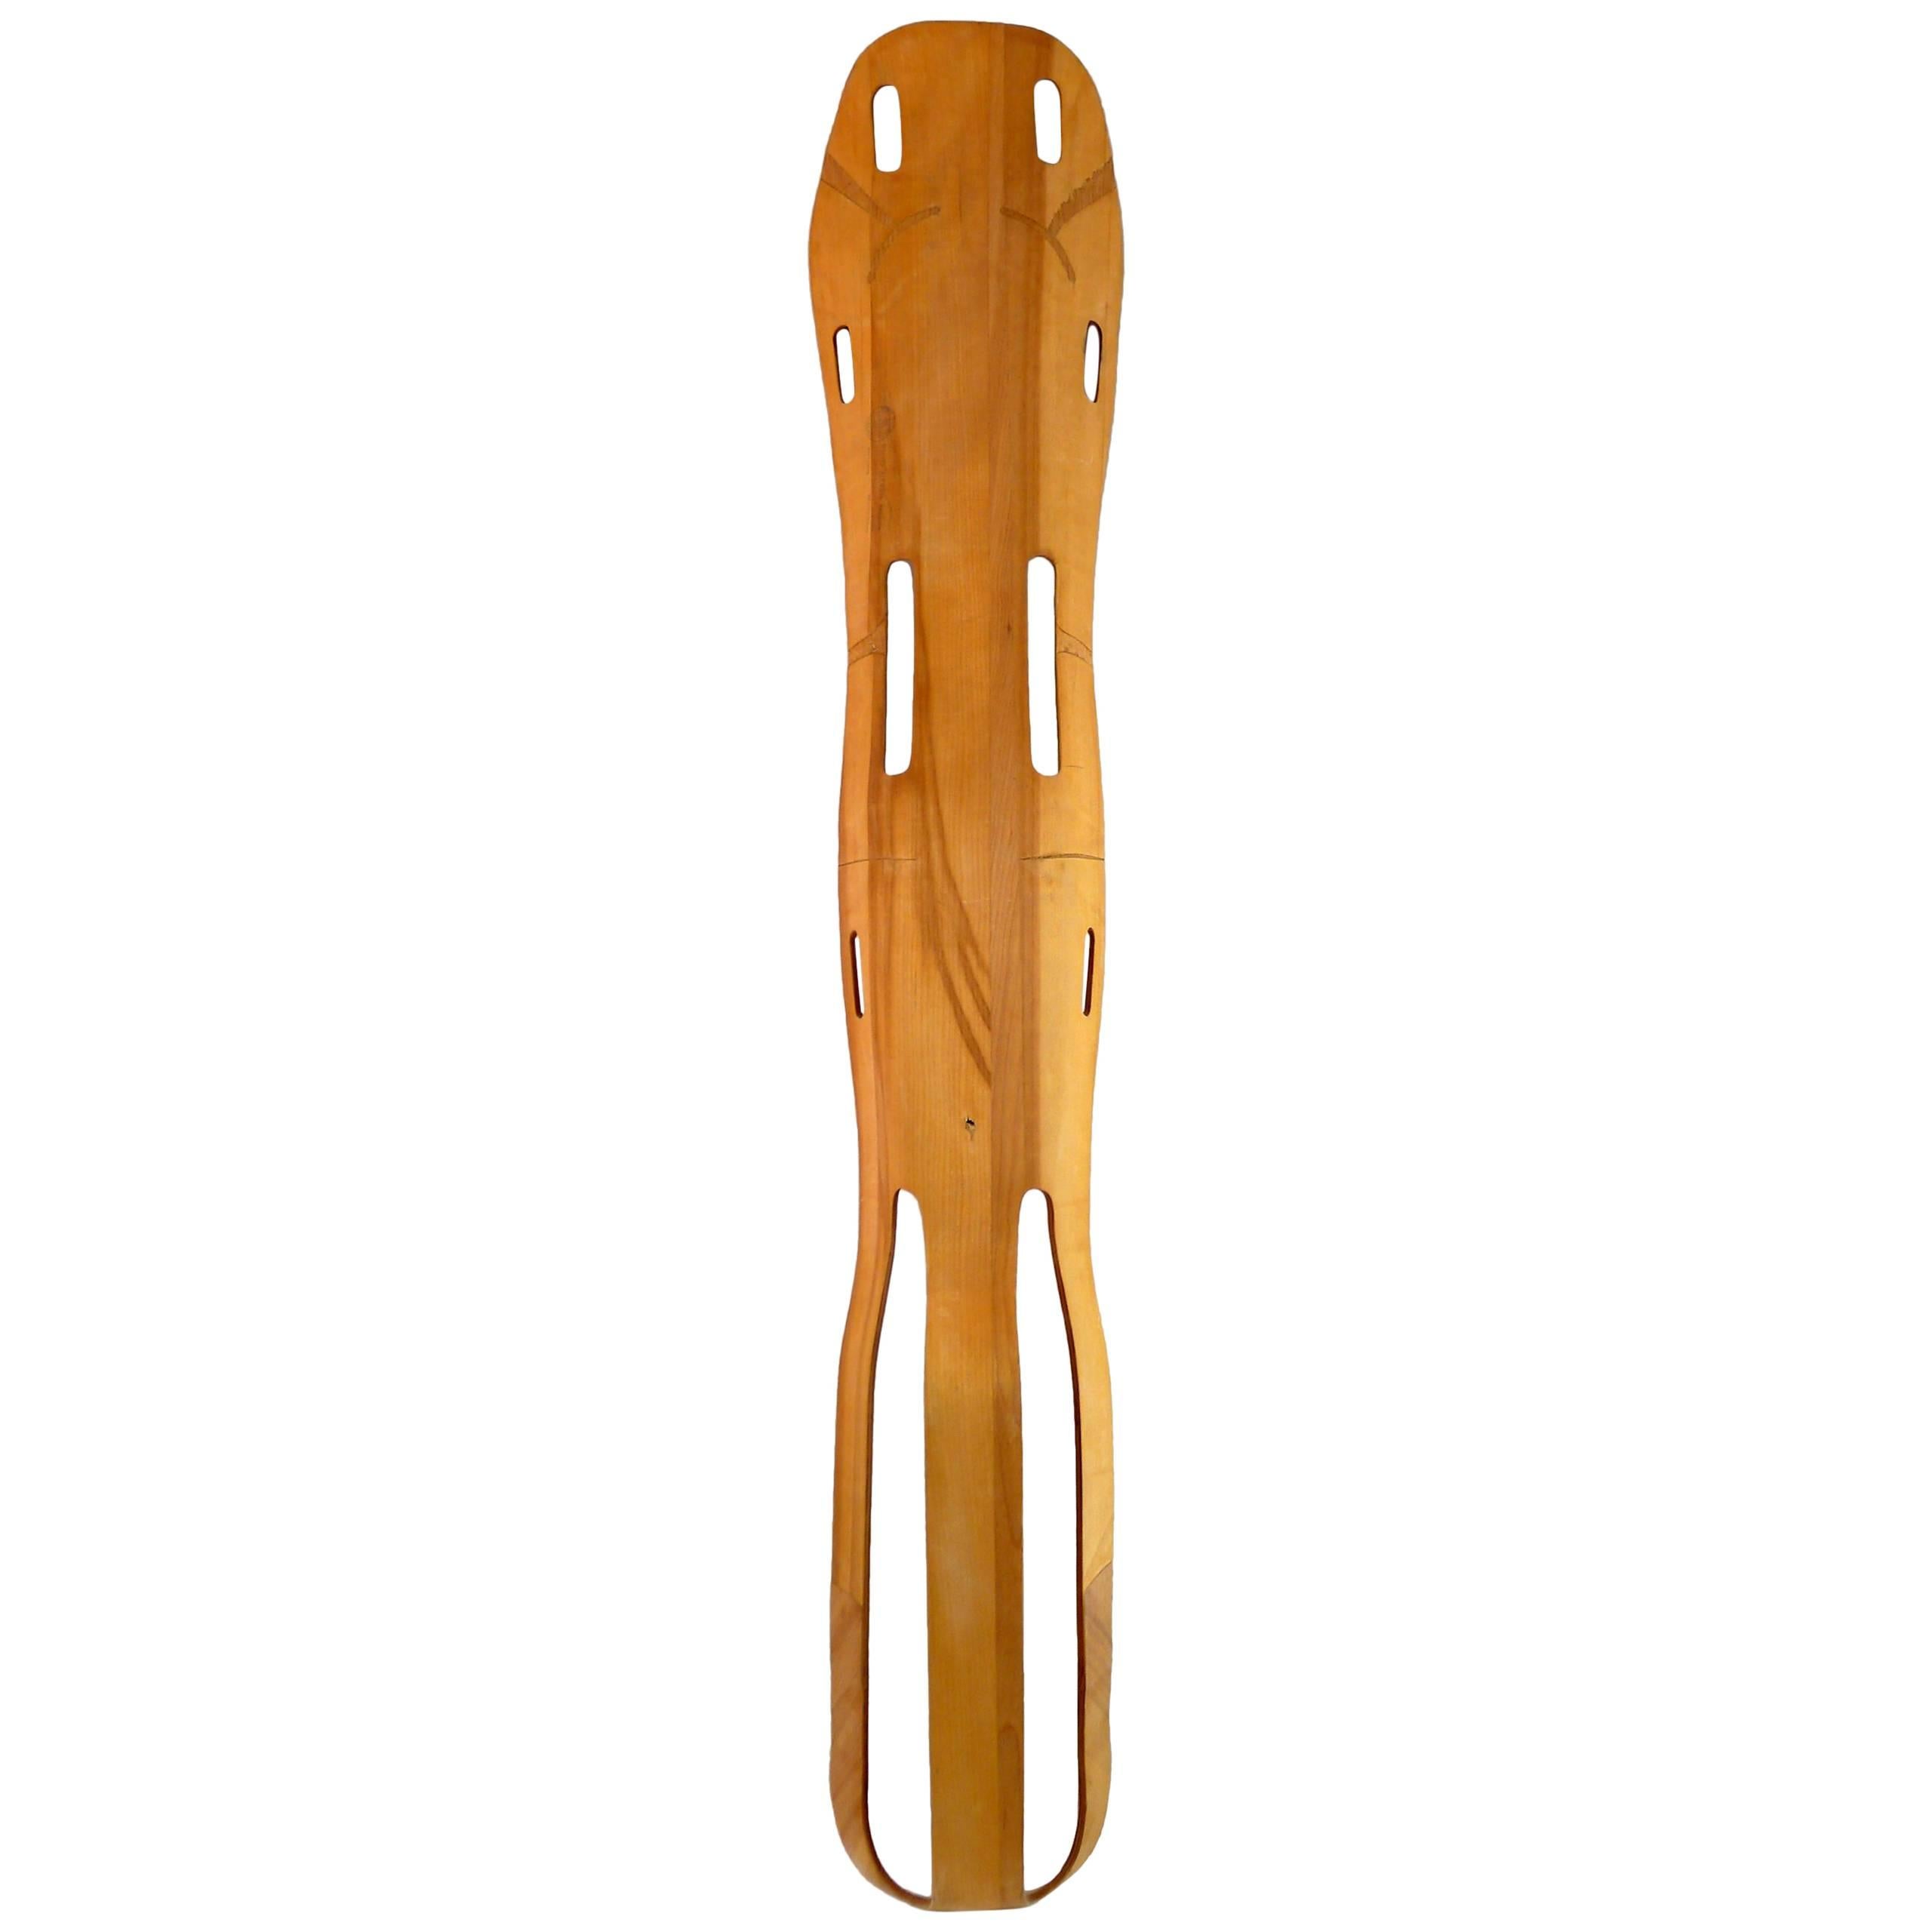 Charles and Ray Eames Molded Plywood Leg Splint Evans Products